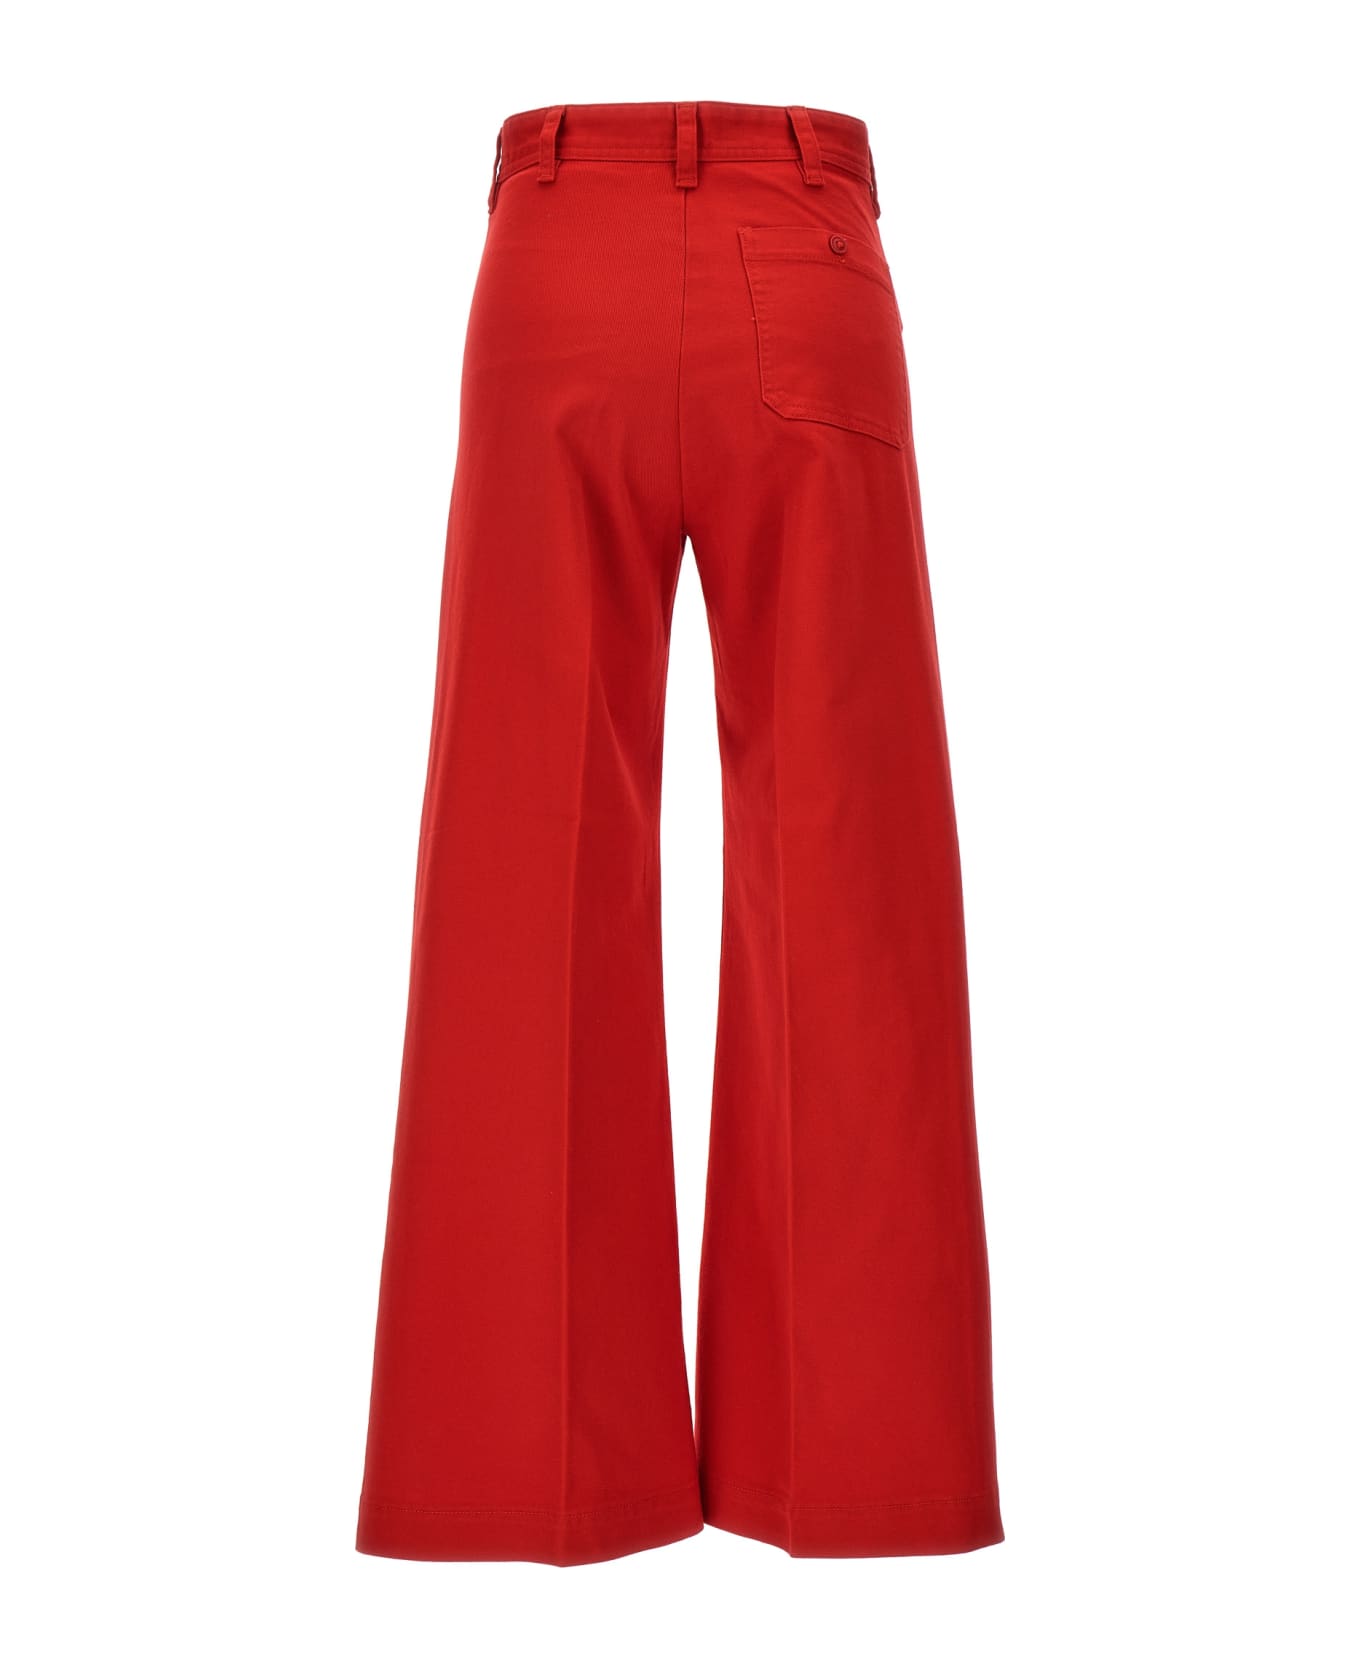 Polo Ralph Lauren Flared Pants - Red ボトムス